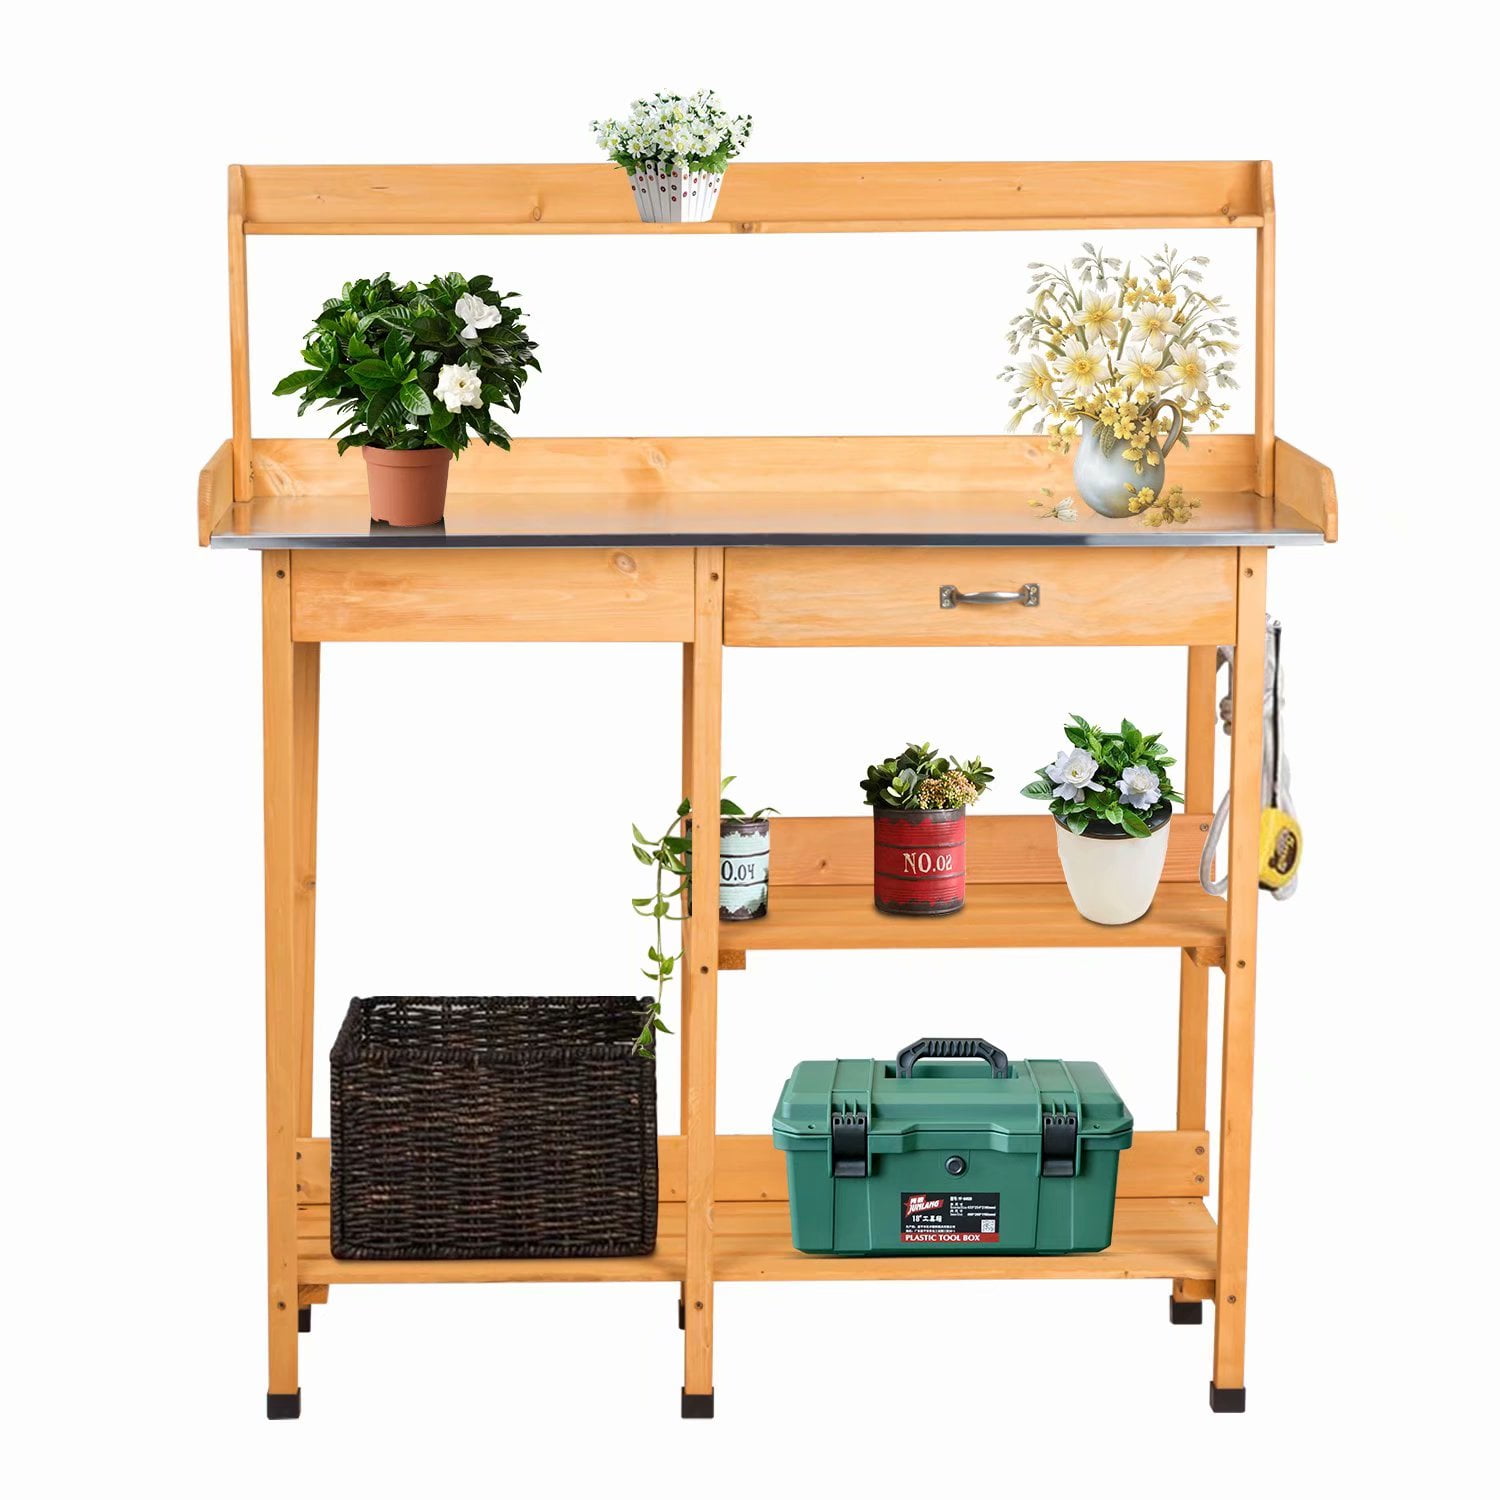 Outdoor Garden Potting Bench Table Metal Work Station Gardening Table with Galvanization Tabletop Drawer Rack Shelves 